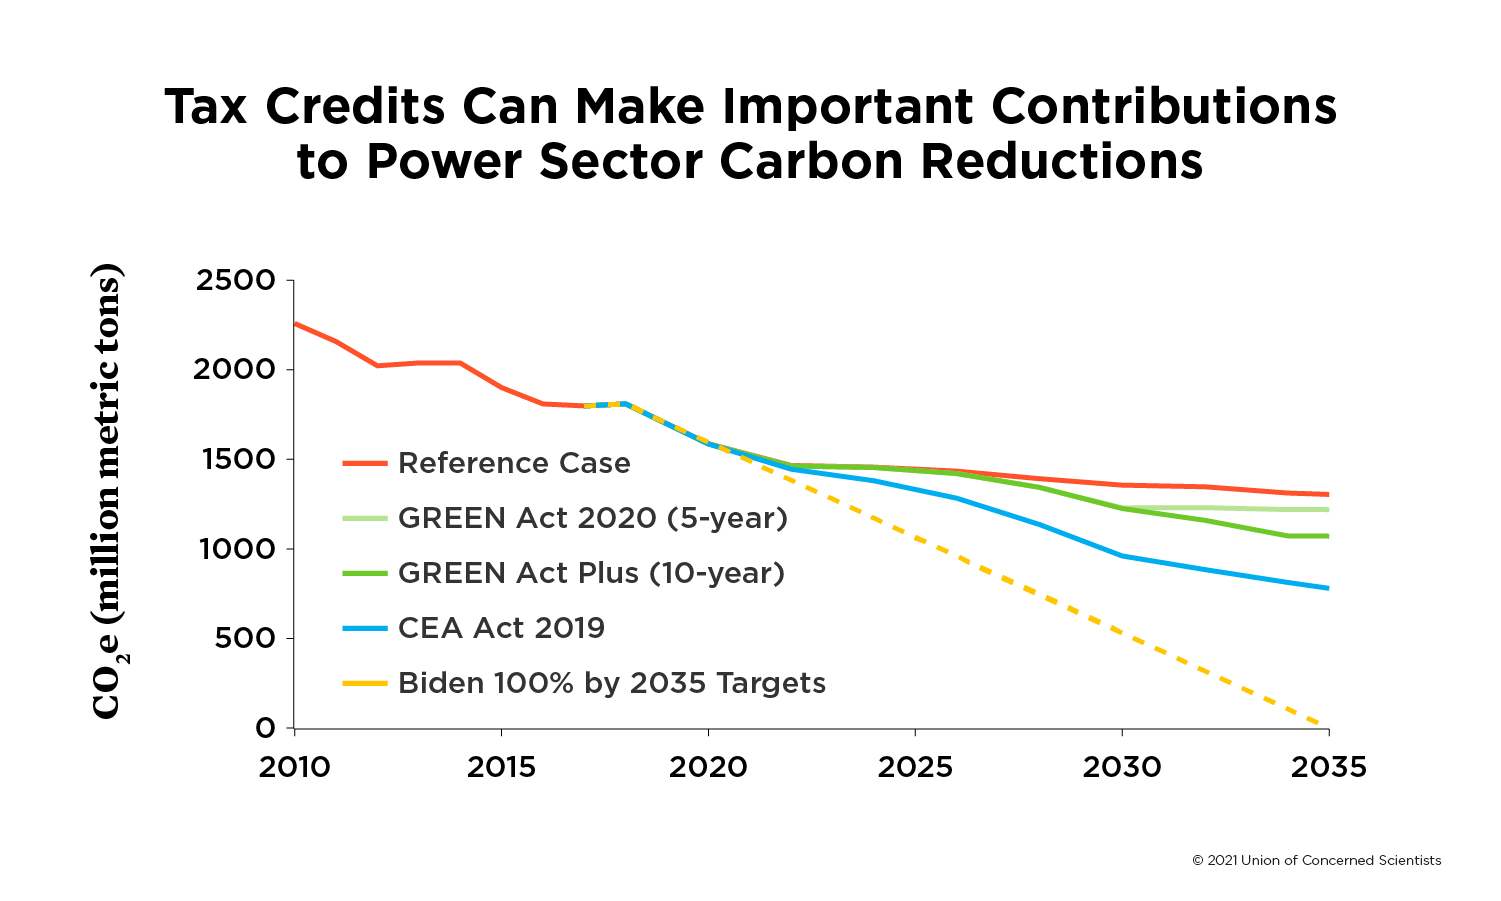 Carbon reductions from different policies